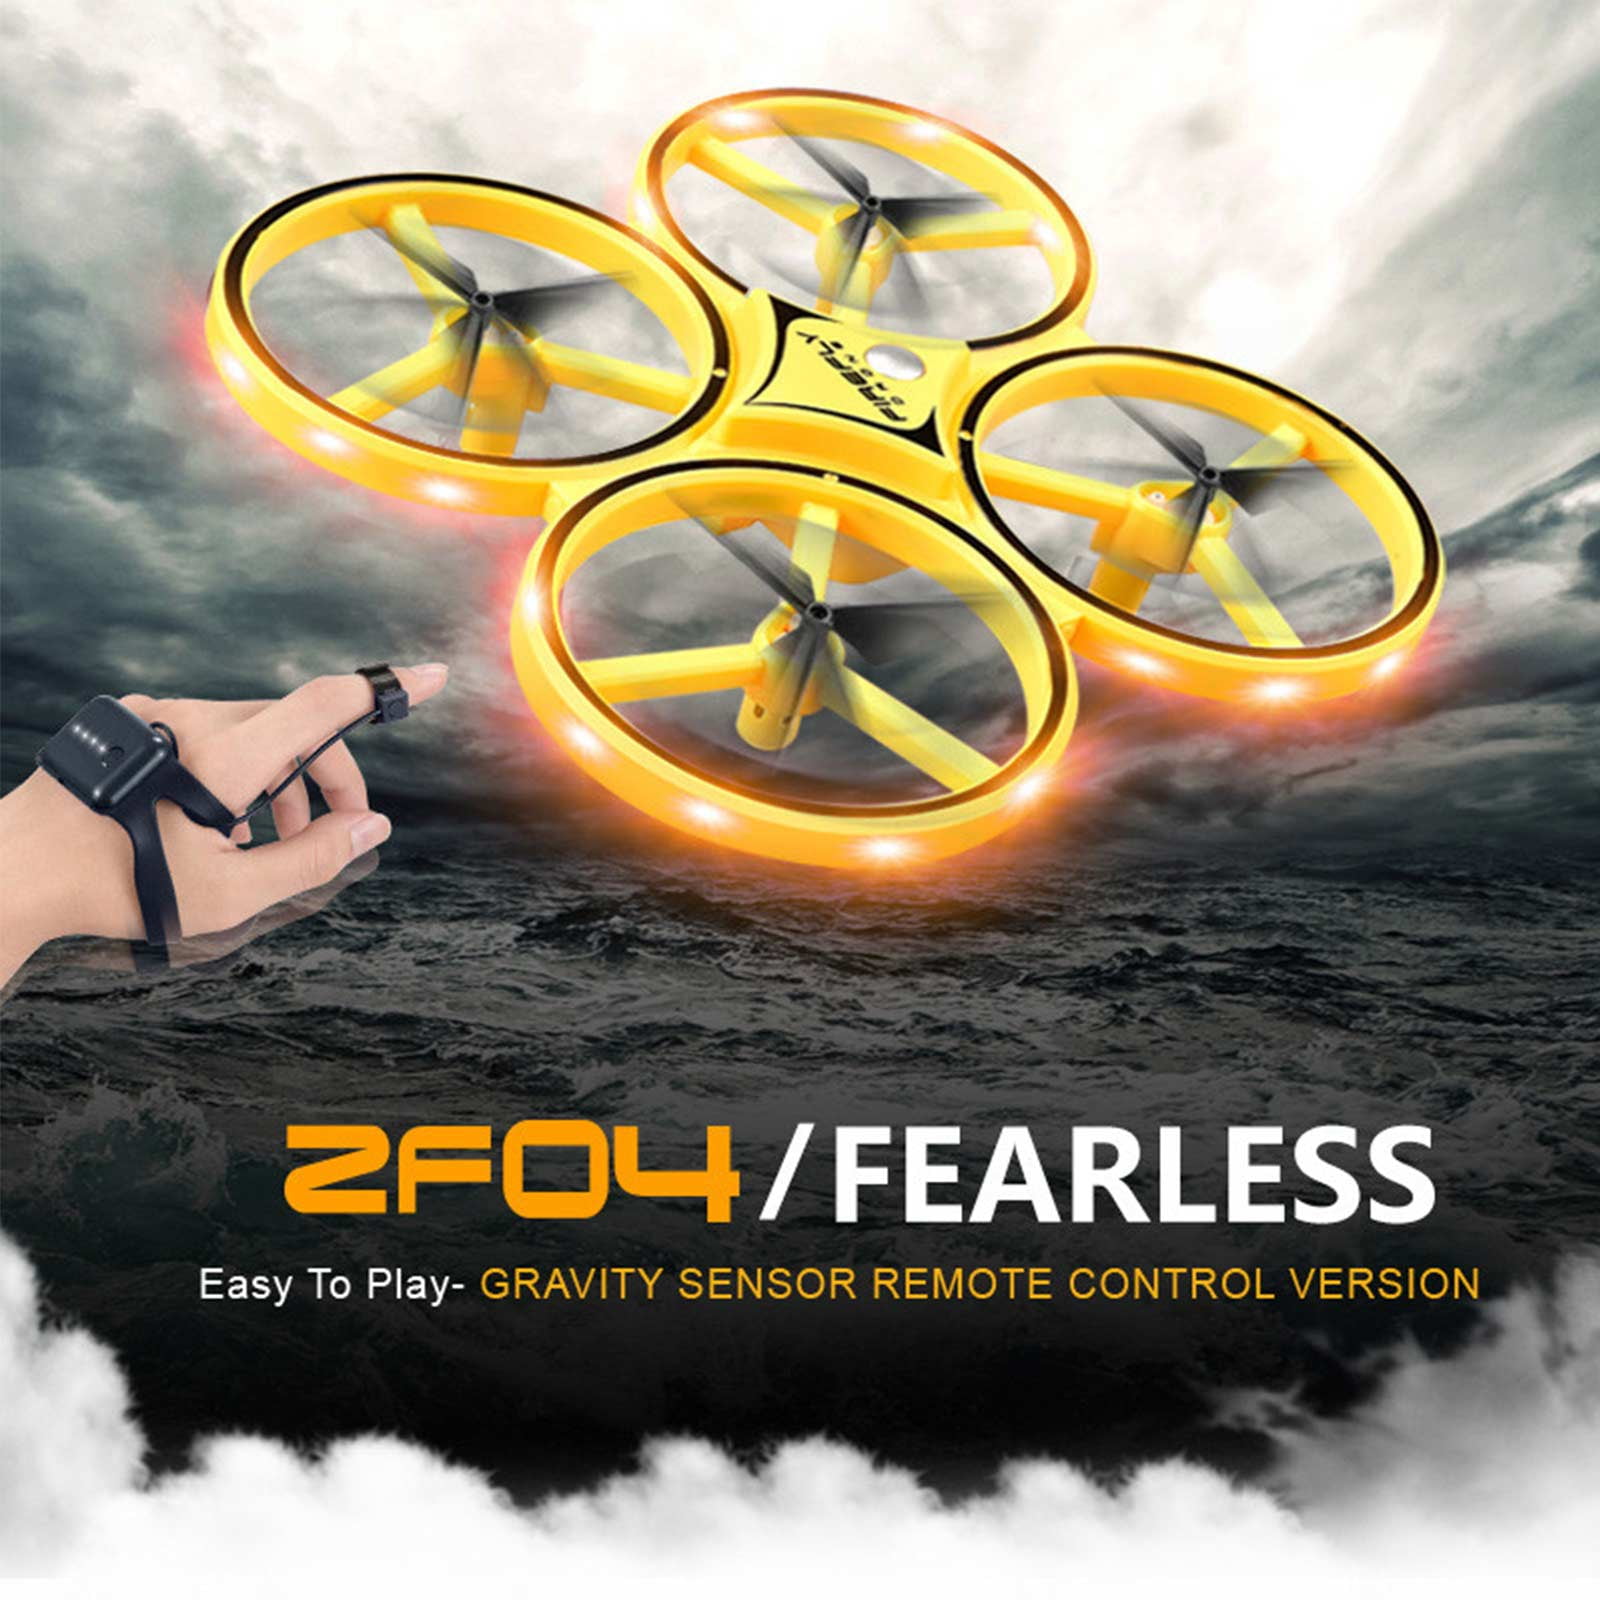 YIDEDE Rc Quadcopter Drone Hand Gesture Mini Helicopter Toys Gifts With Light - Walmart.com